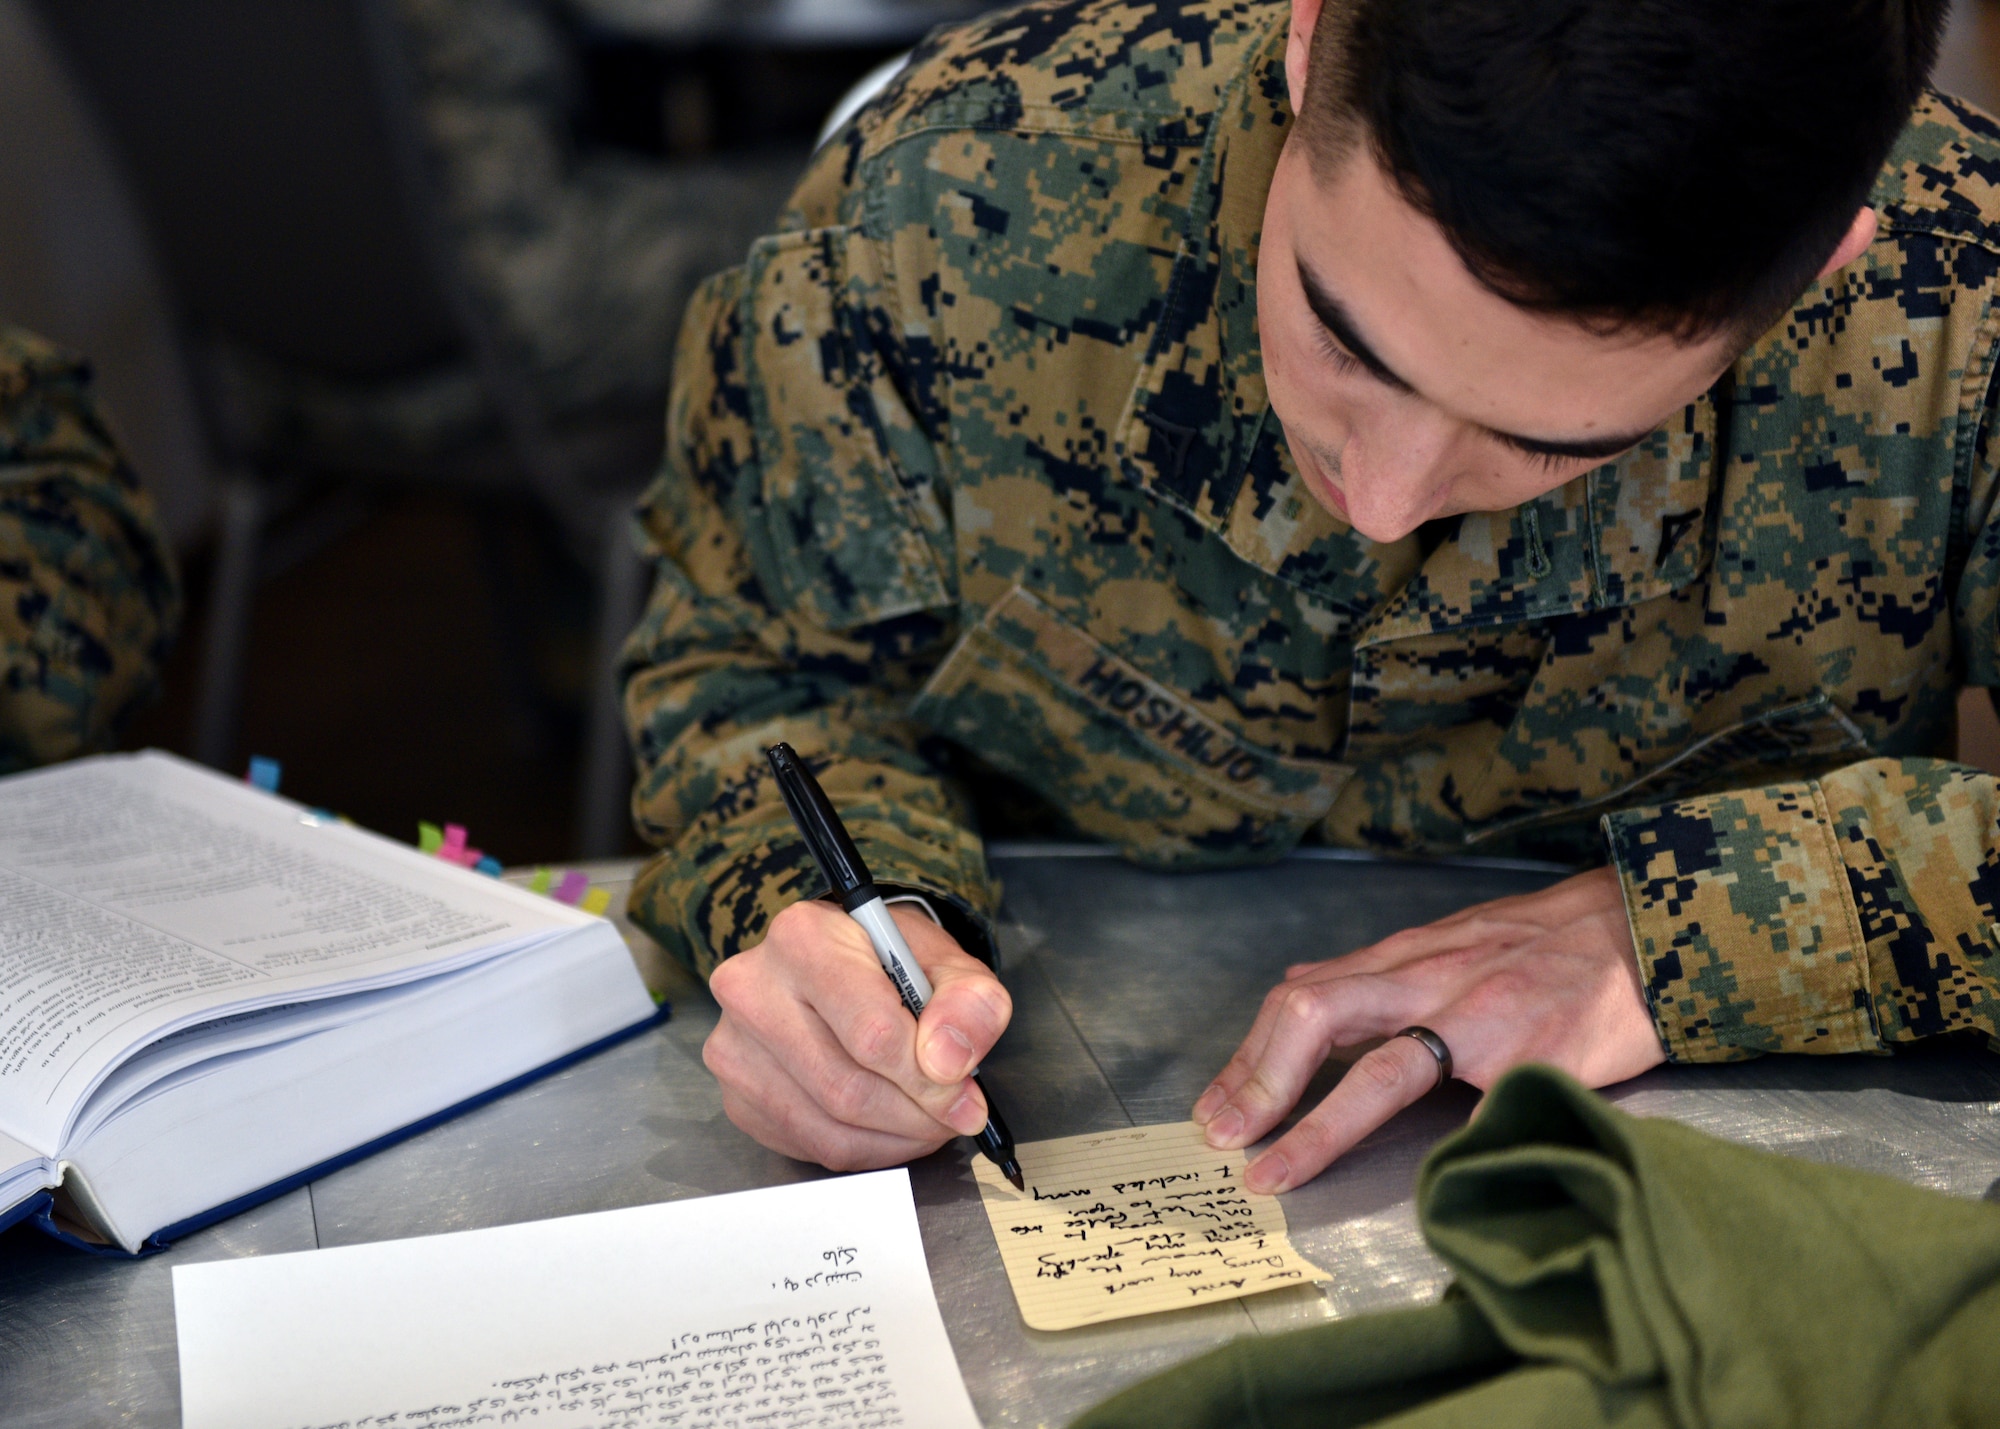 Lance Cpl. Gunther Hoshijo, 316th Training Squadron Pashto linguist student, participates in an exercise during the 316th TRS’ Inaugural Language Fair February 28, 2020, at the event center on Goodfellow Air Force Base, Texas. Pashto is a member of the southeastern Iranian branch of Indo-Iranian languages spoken in Afghanistan, Pakistan and Iran. (U.S. Air Force photo by Airman 1st Class Robyn Hunsinger)